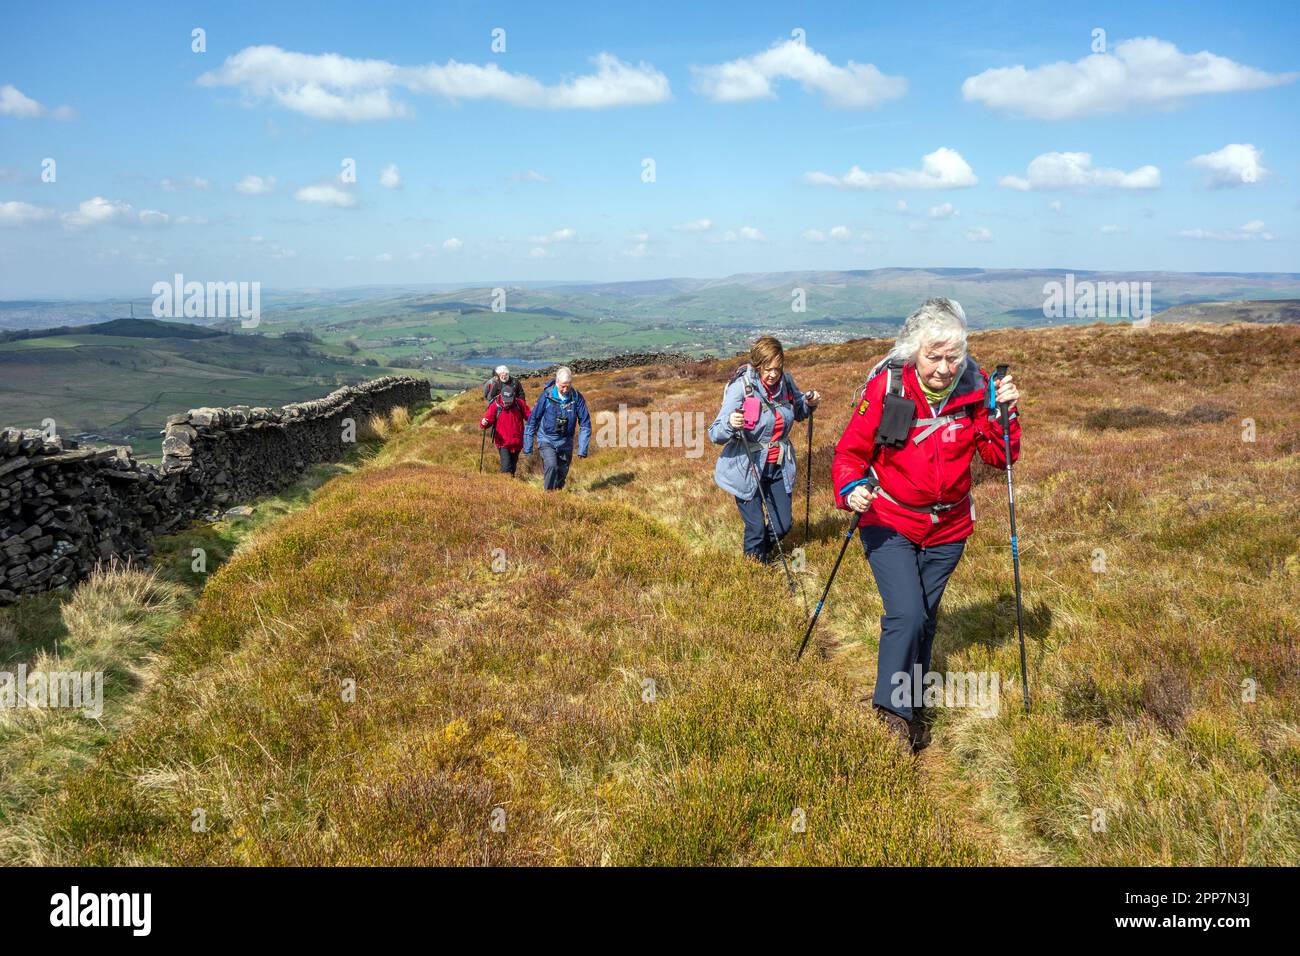 Members of the Sandbach U3A long walking group enjoying rambling in the Peak District hills above the Derbyshire town of Buxton England Stock Photo